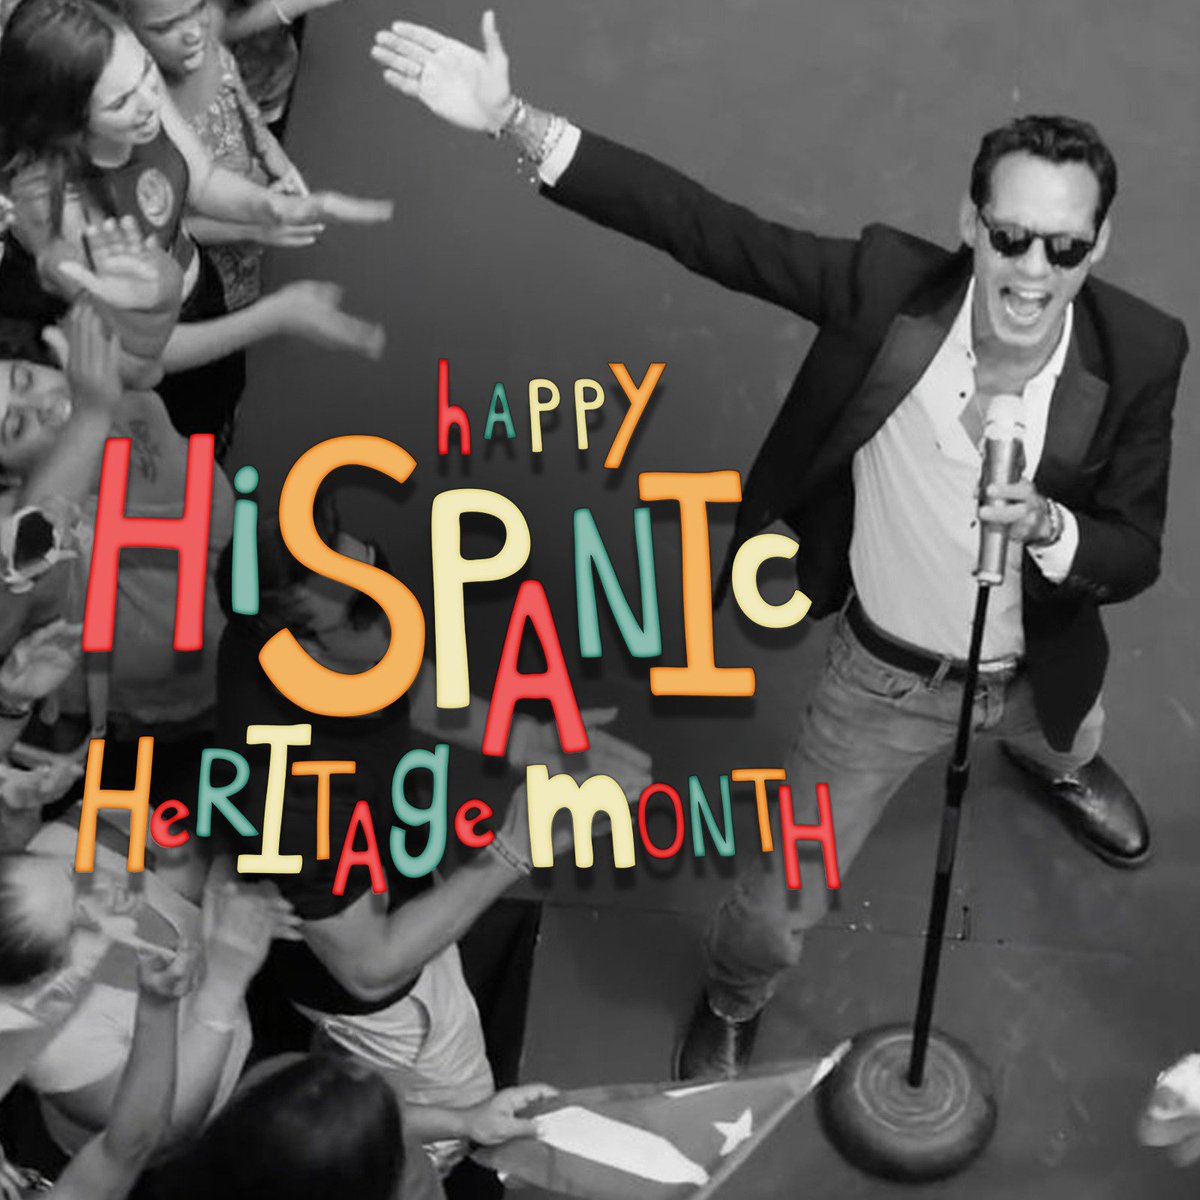 Happy Hispanic Heritage Month! we celebrate our culture, history and pride. #HispanicHeritageMonth https://t.co/Yxl4gMiXED